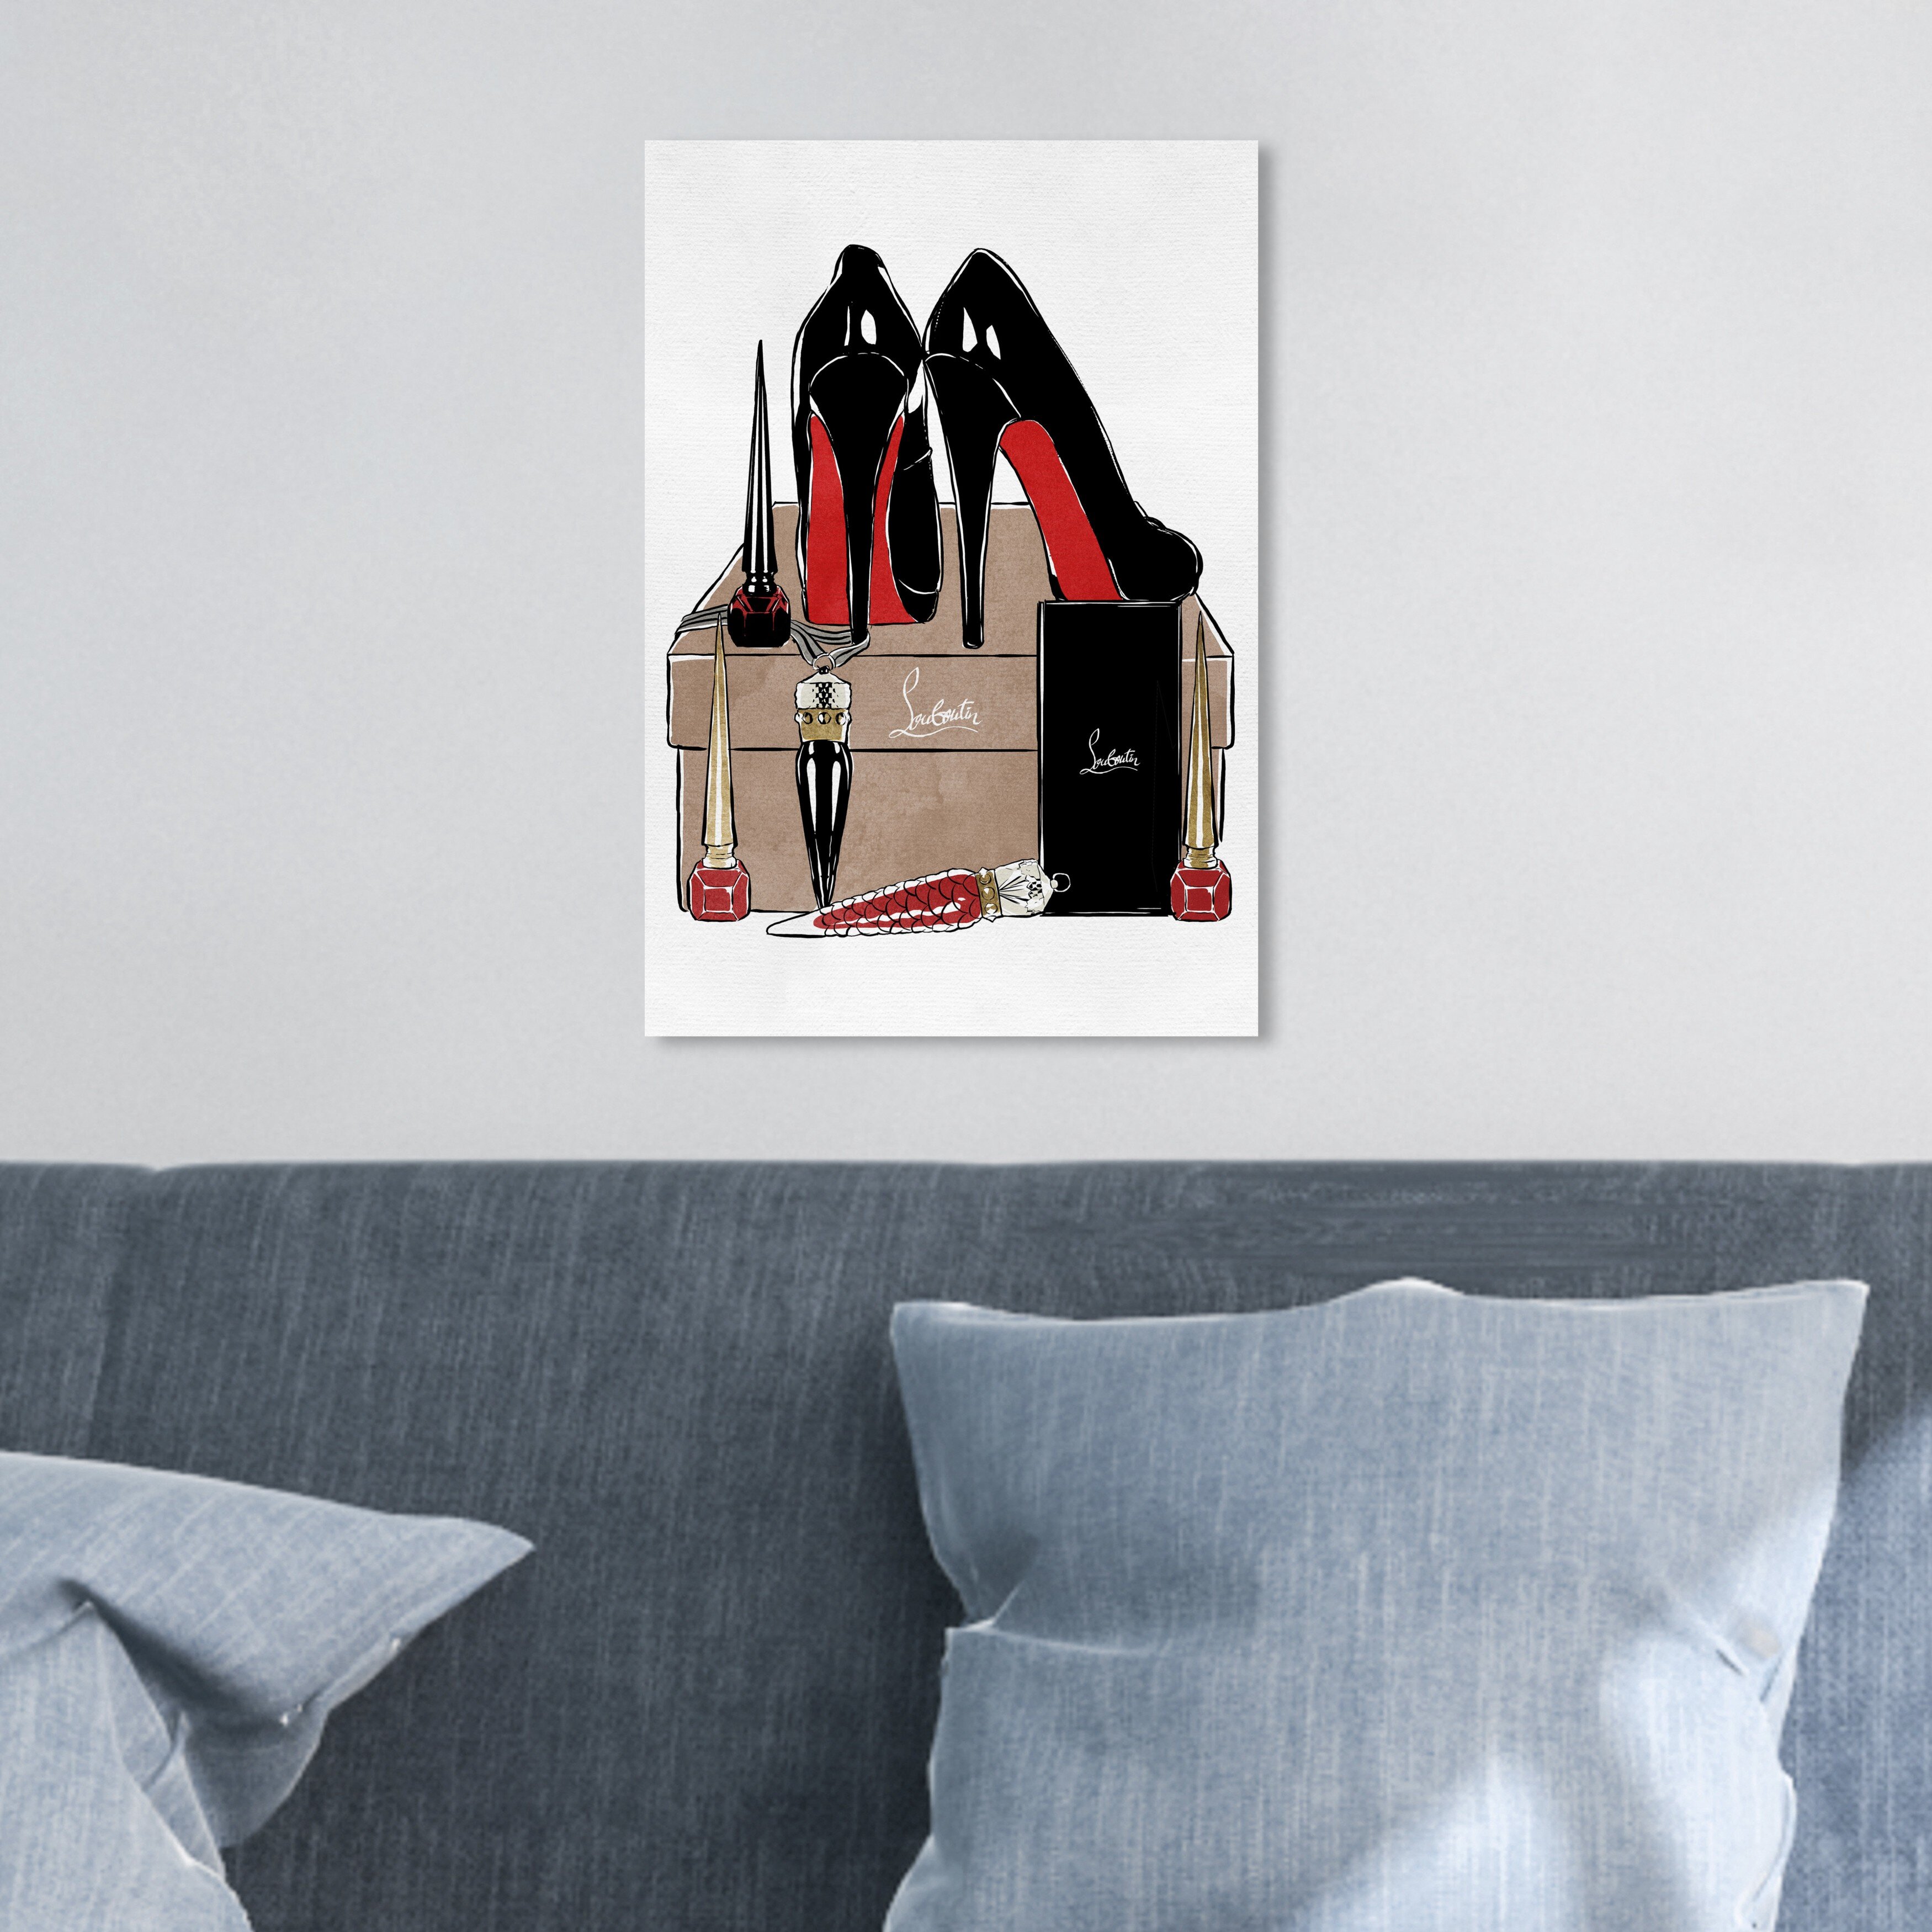 Stupell Industries Glam High Heel Shoe Fashion Book Stack Cheetah Decorative Printed Throw Pillow by Madeline Blake